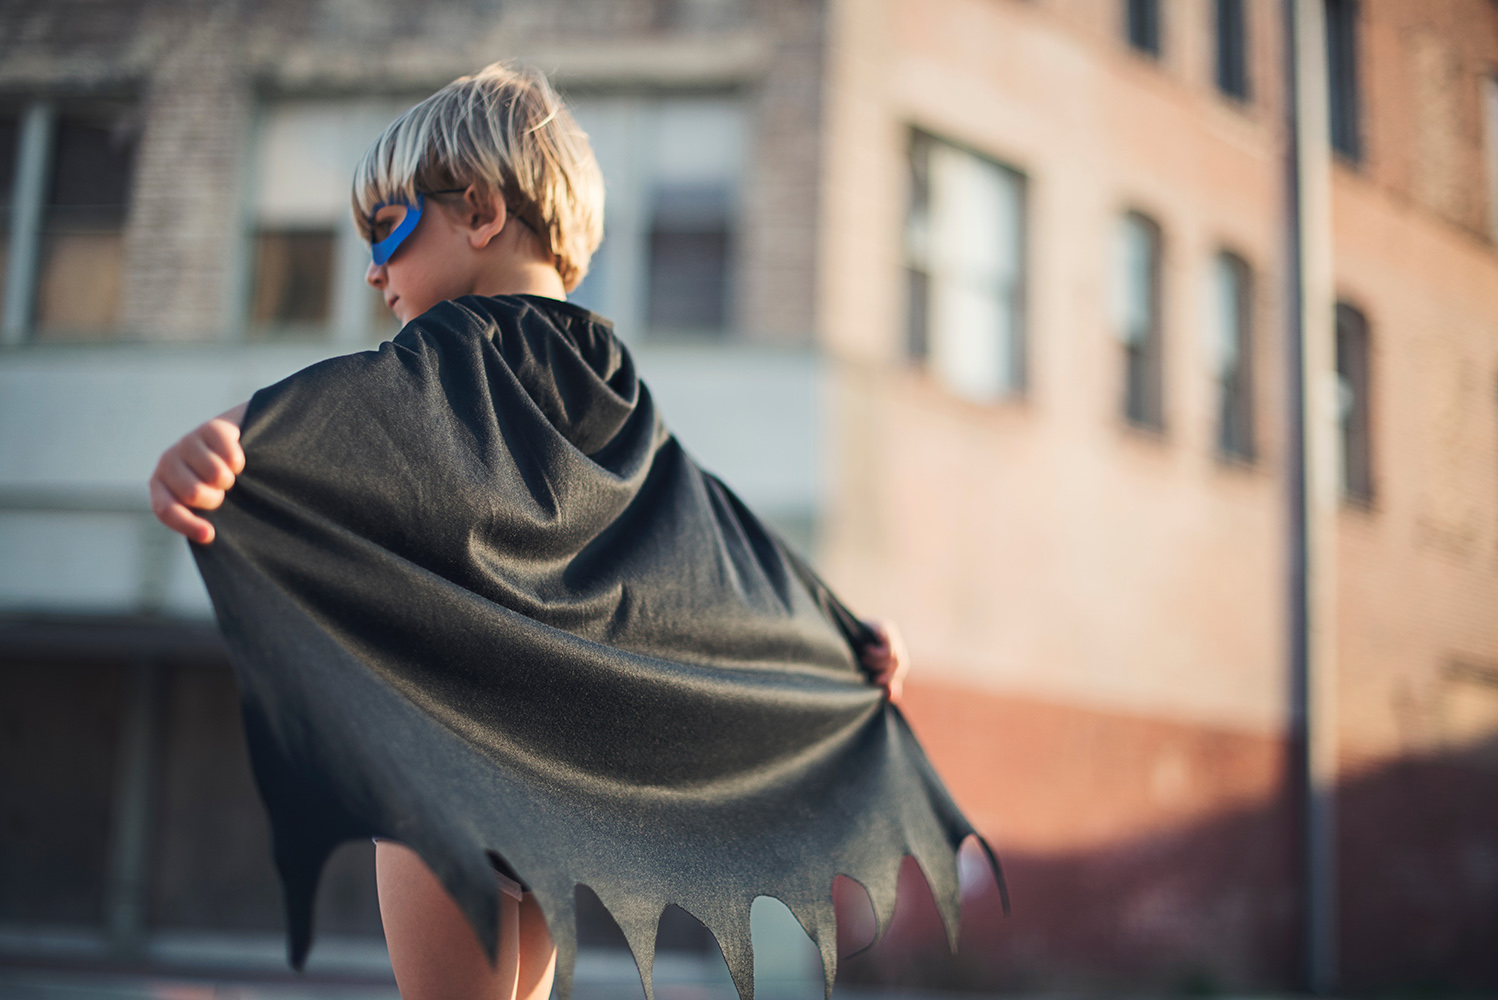 What is your leadership superpower? – Leaders who will survive post-COVID-19.